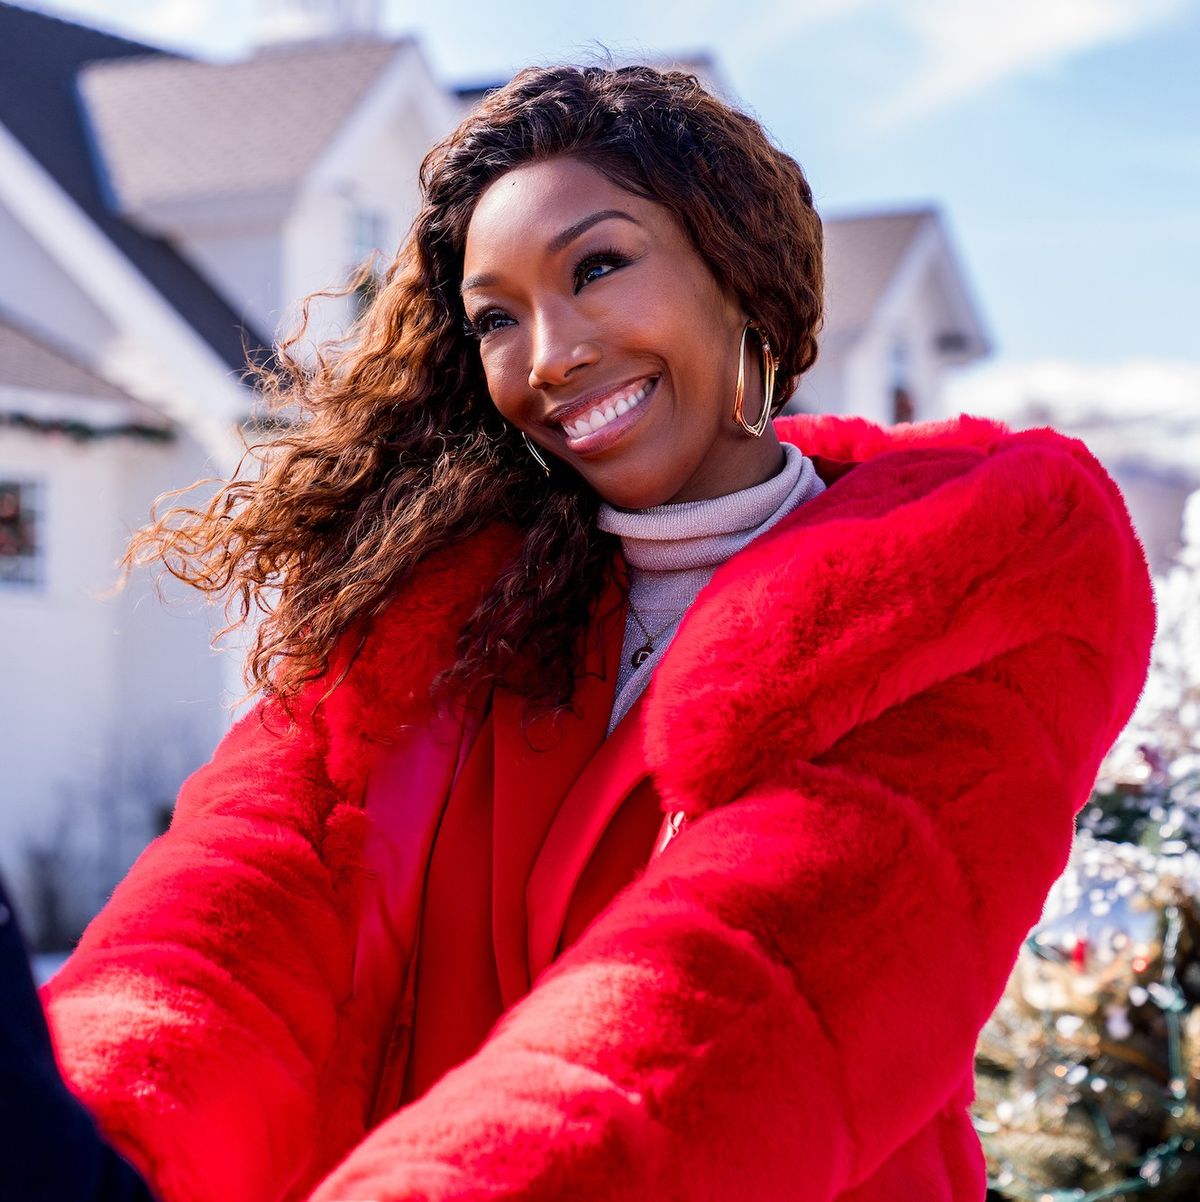 Watch This Exclusive Clip From Brandy's "Best. Christmas. Ever!"